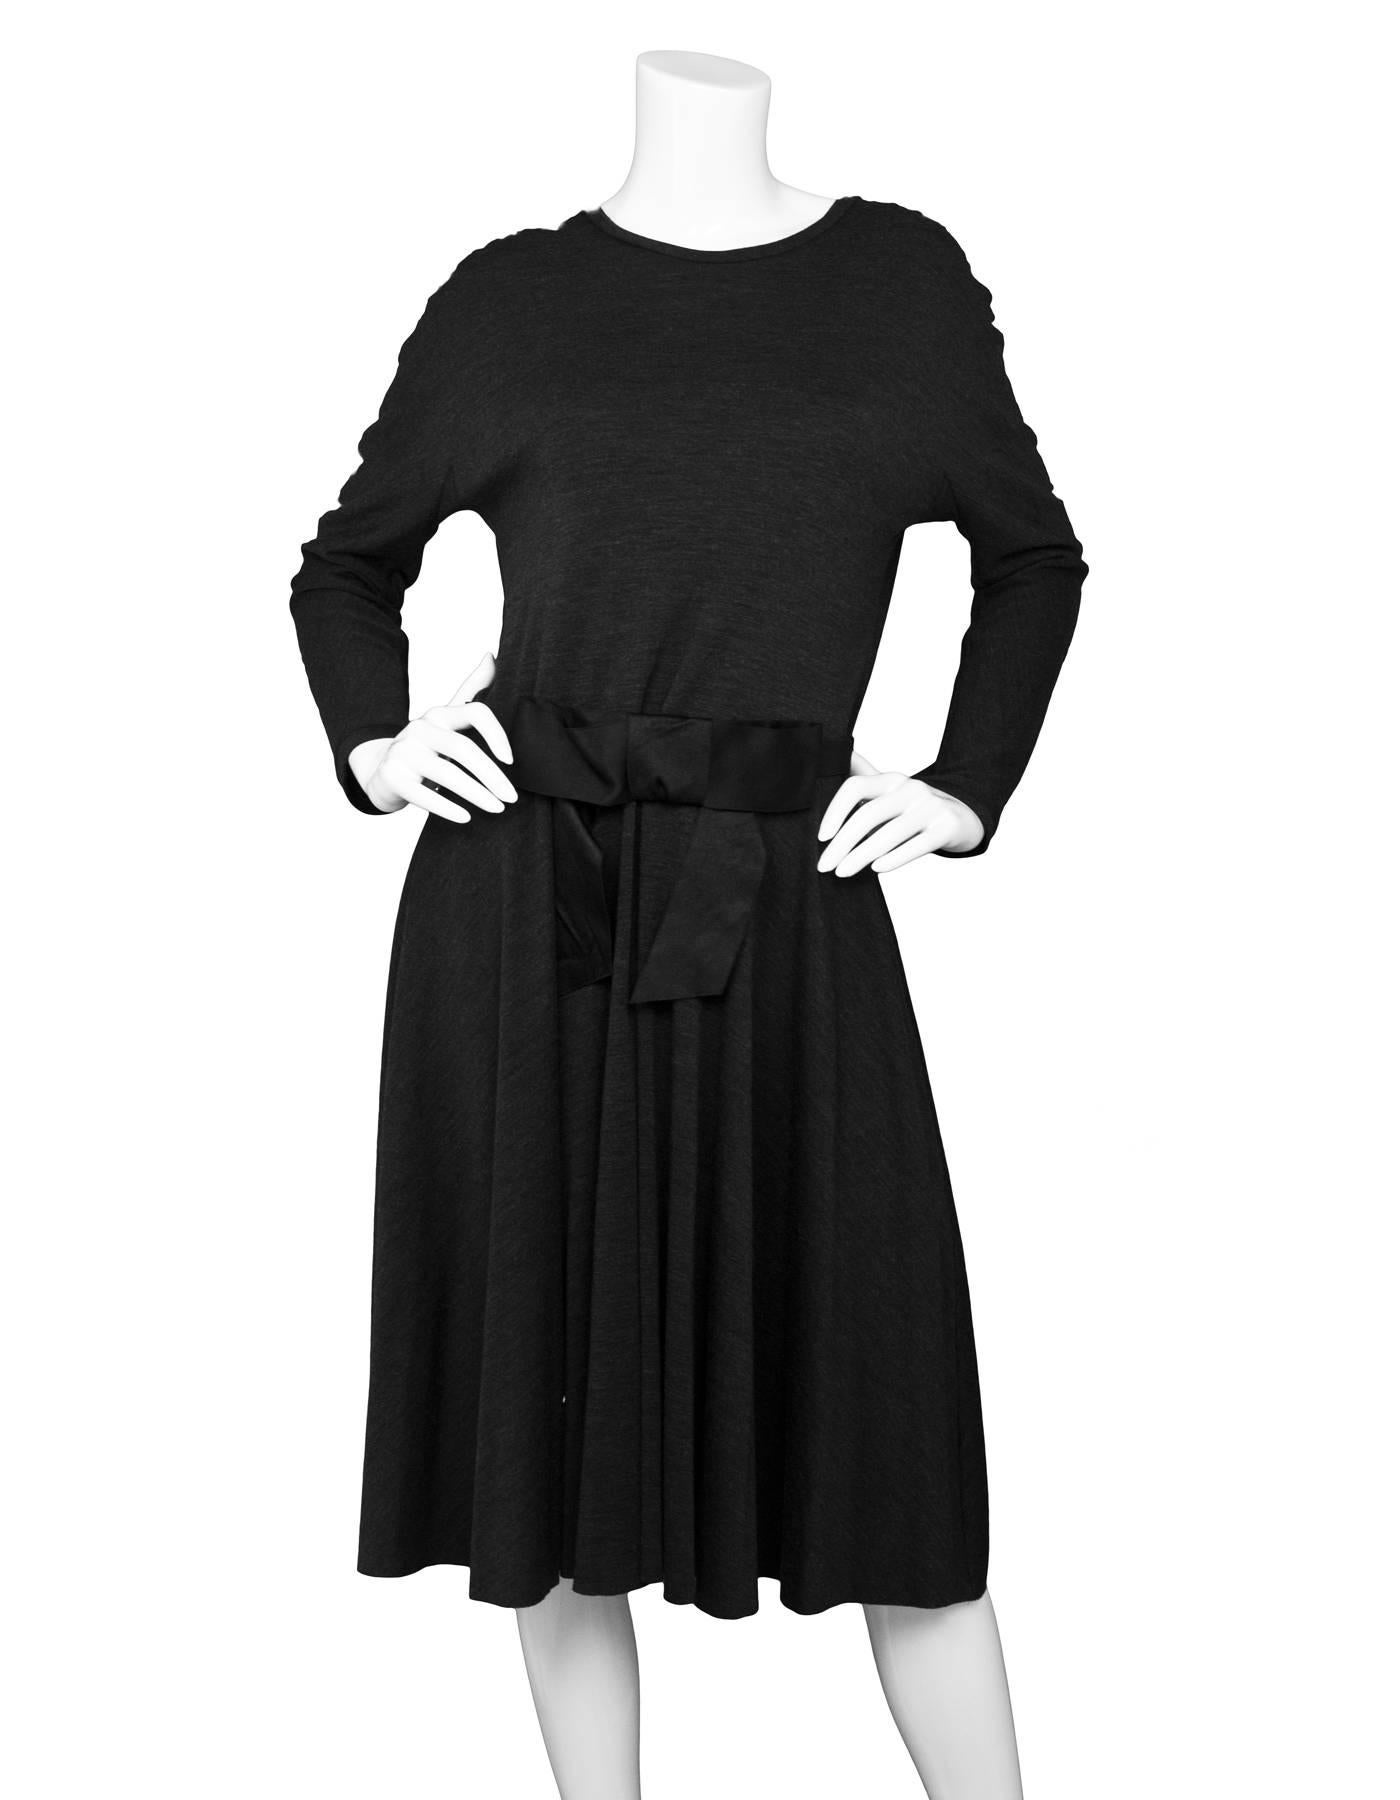 Lanvin Grey Wool Long Sleeve Fit Flare Dress
Features elastic waist belt with satin bow

Made In: Romania
Color: Grey
Composition: 100% wool
Lining: None
Closure/Opening: Back center zip up
Exterior Pockets: Two hip pockets
Interior Pockets: